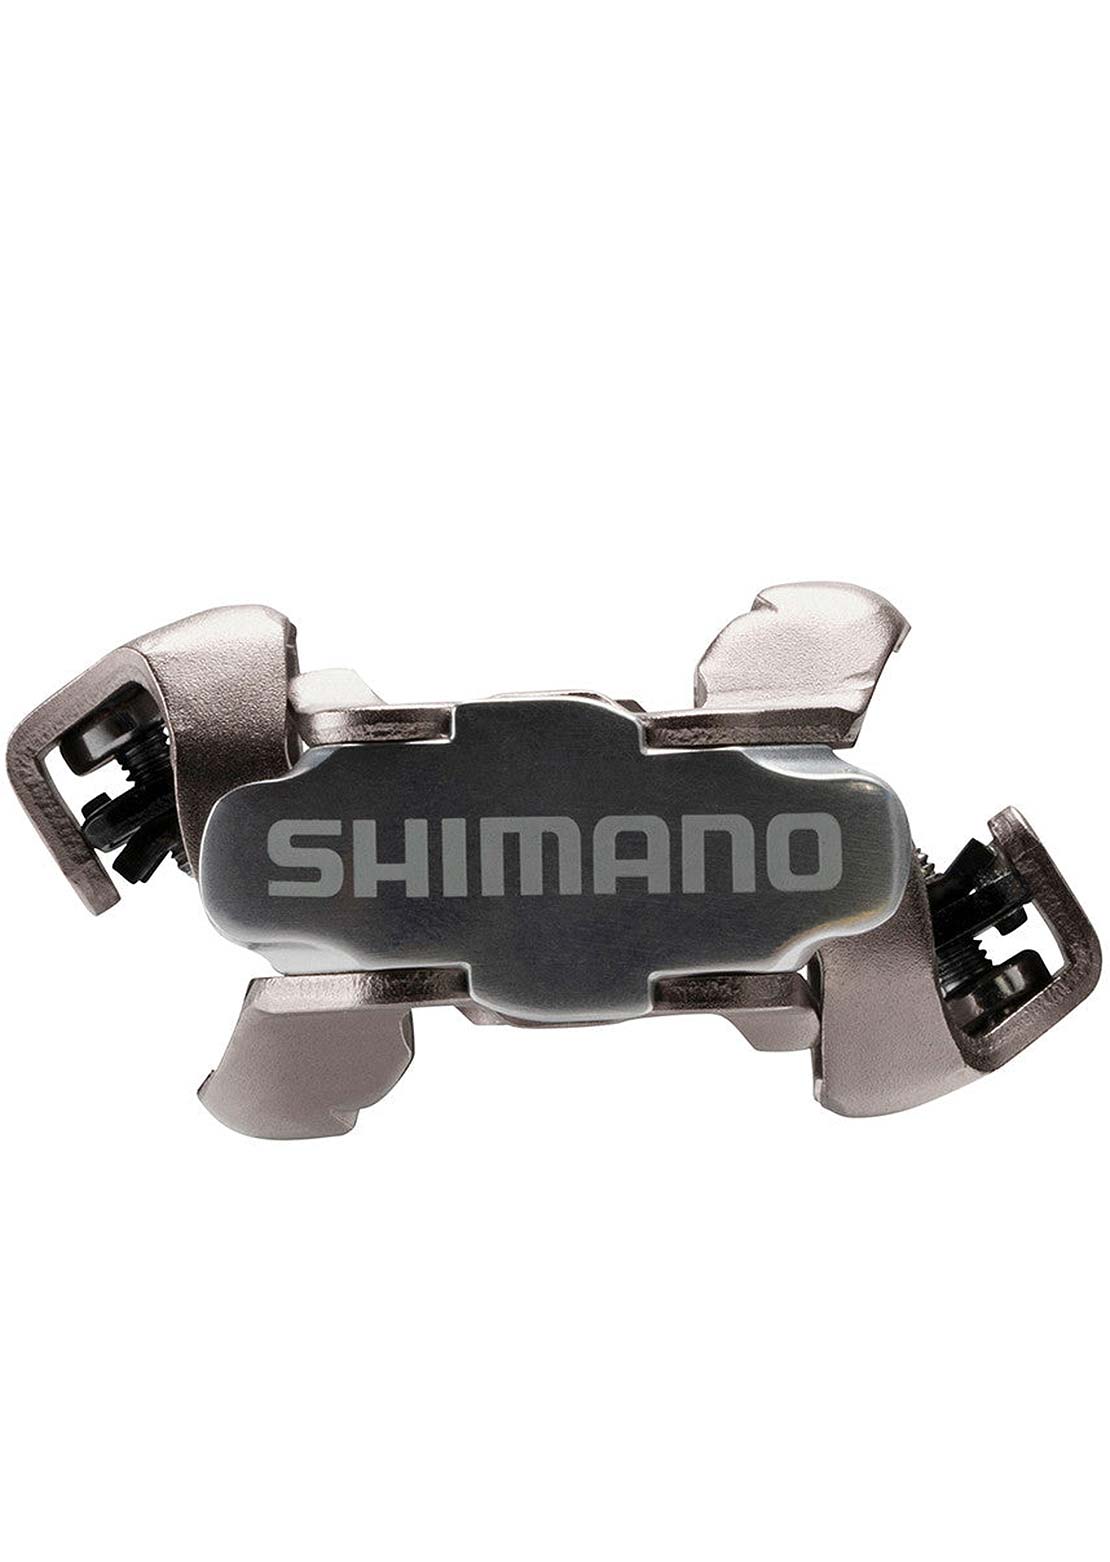 Shimano PD-M540 With Cleat Pedals